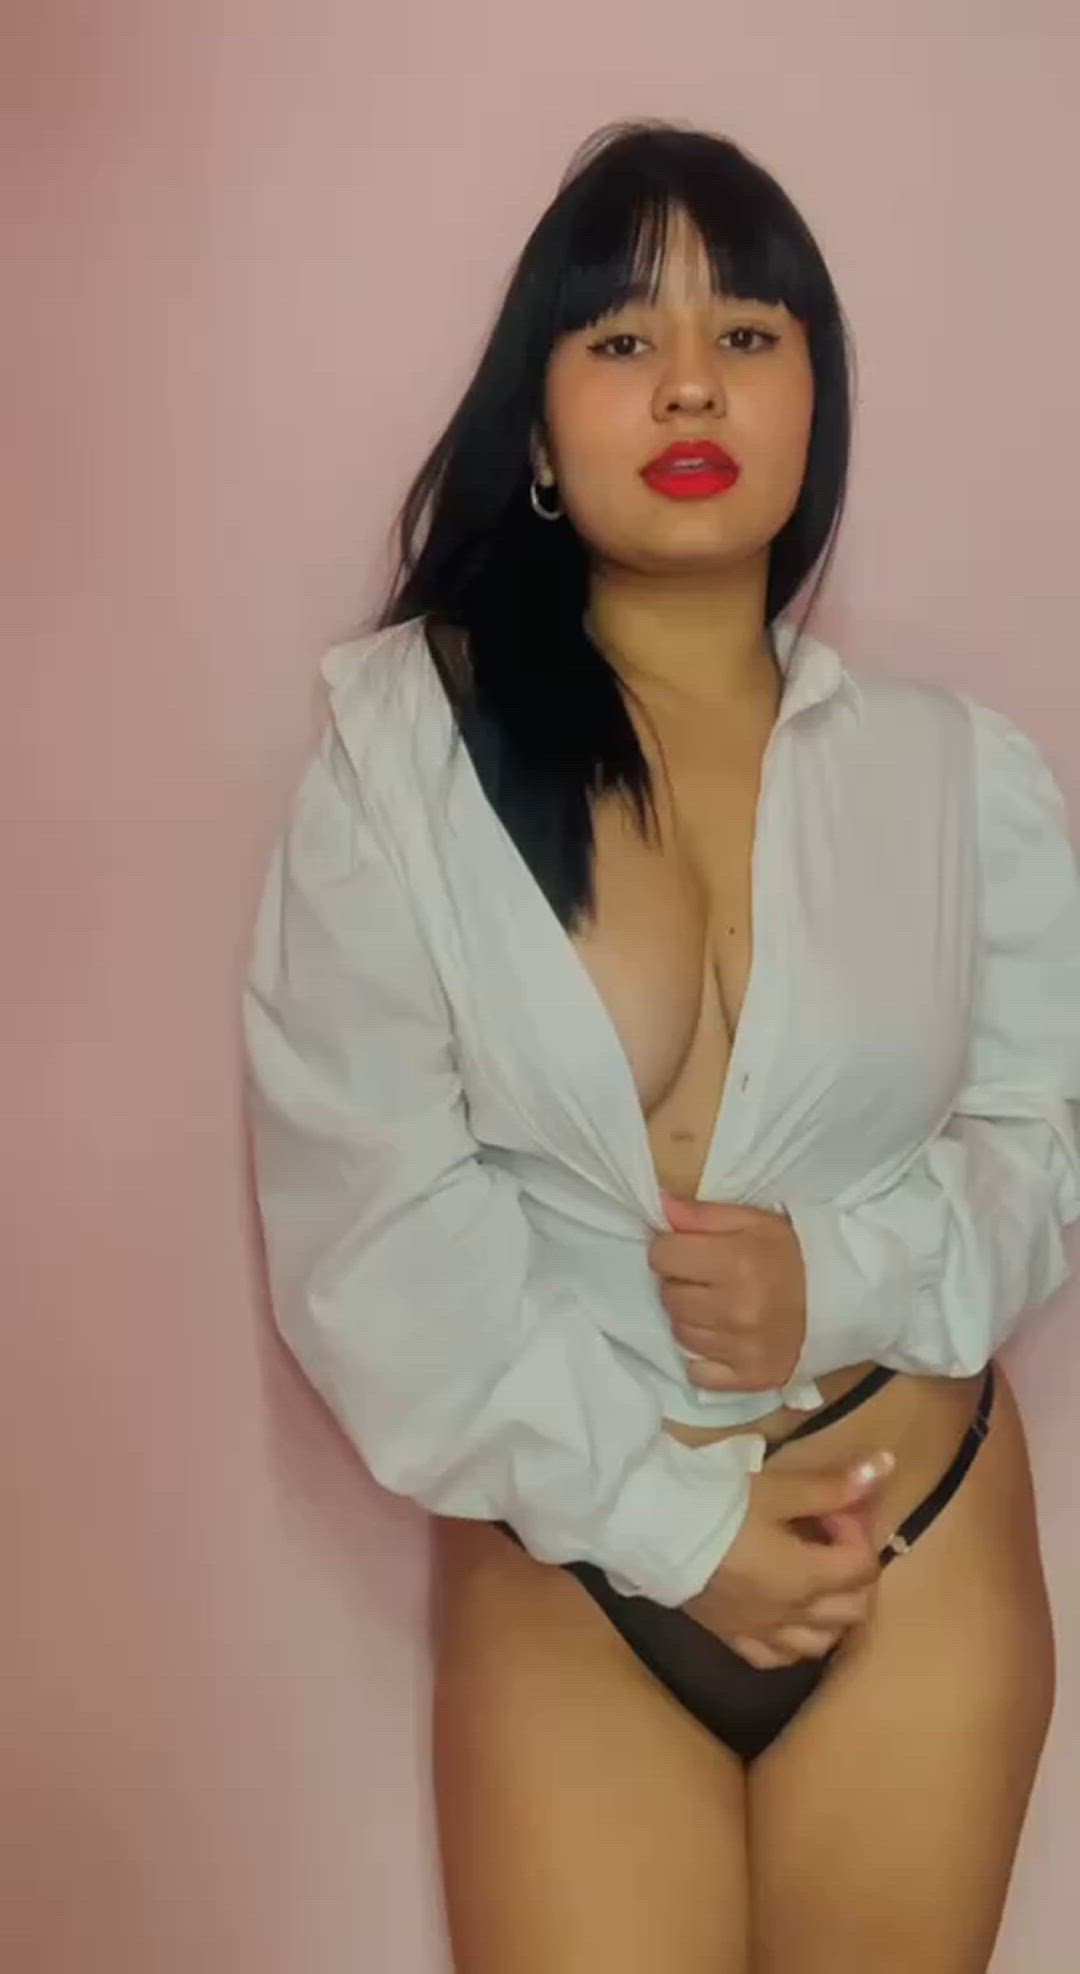 Big Tits porn video with onlyfans model zoyakaur <strong>@zoyakaur</strong>